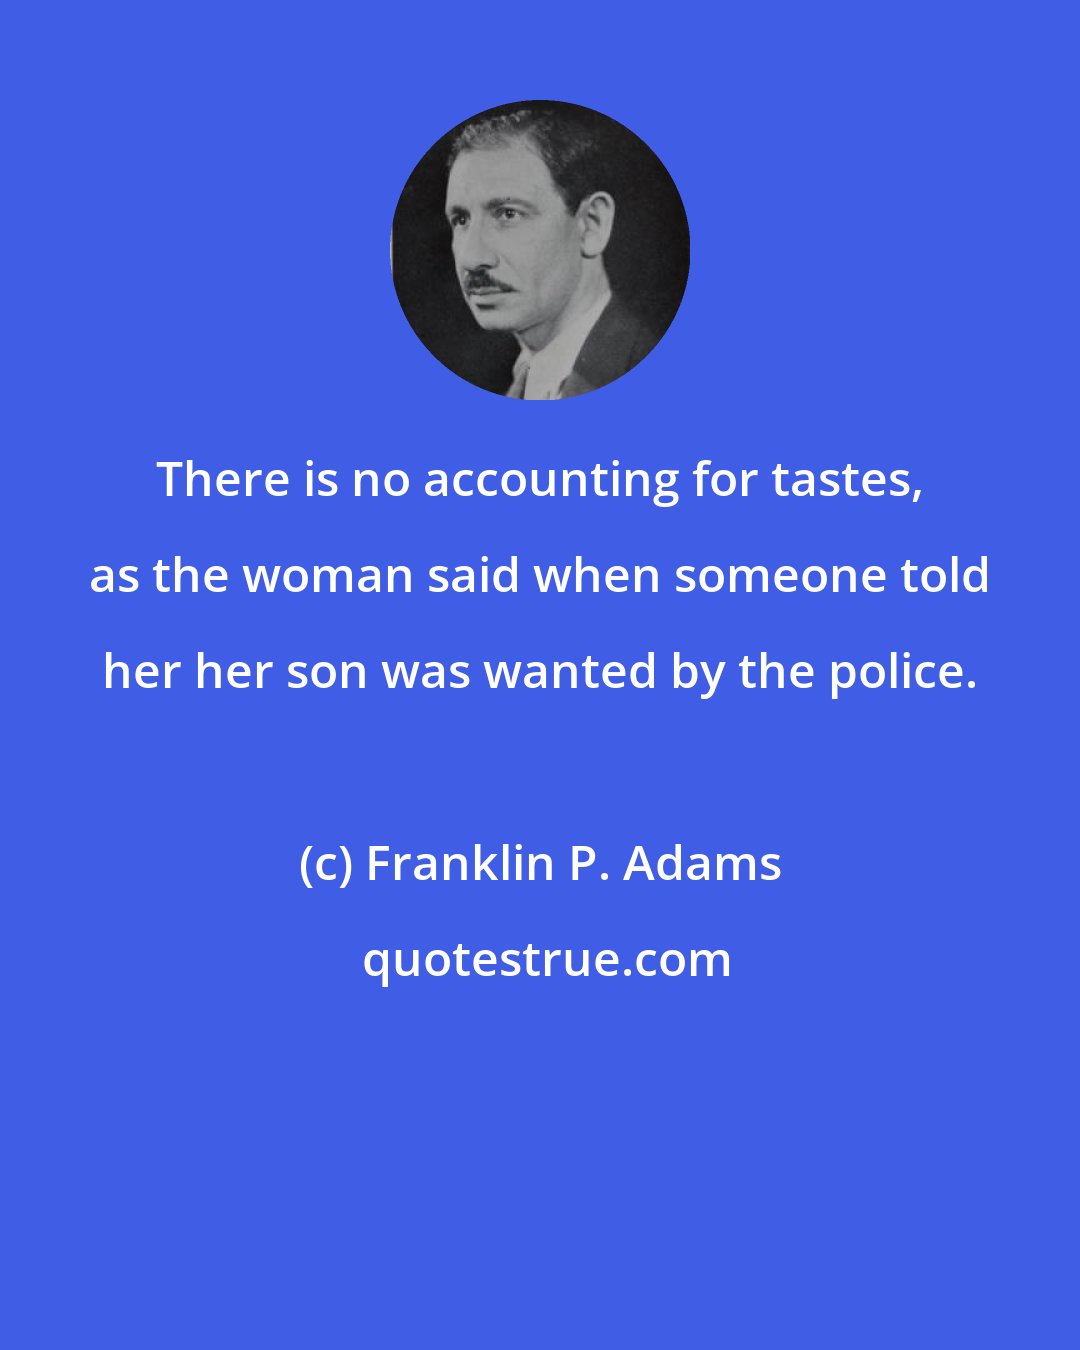 Franklin P. Adams: There is no accounting for tastes, as the woman said when someone told her her son was wanted by the police.